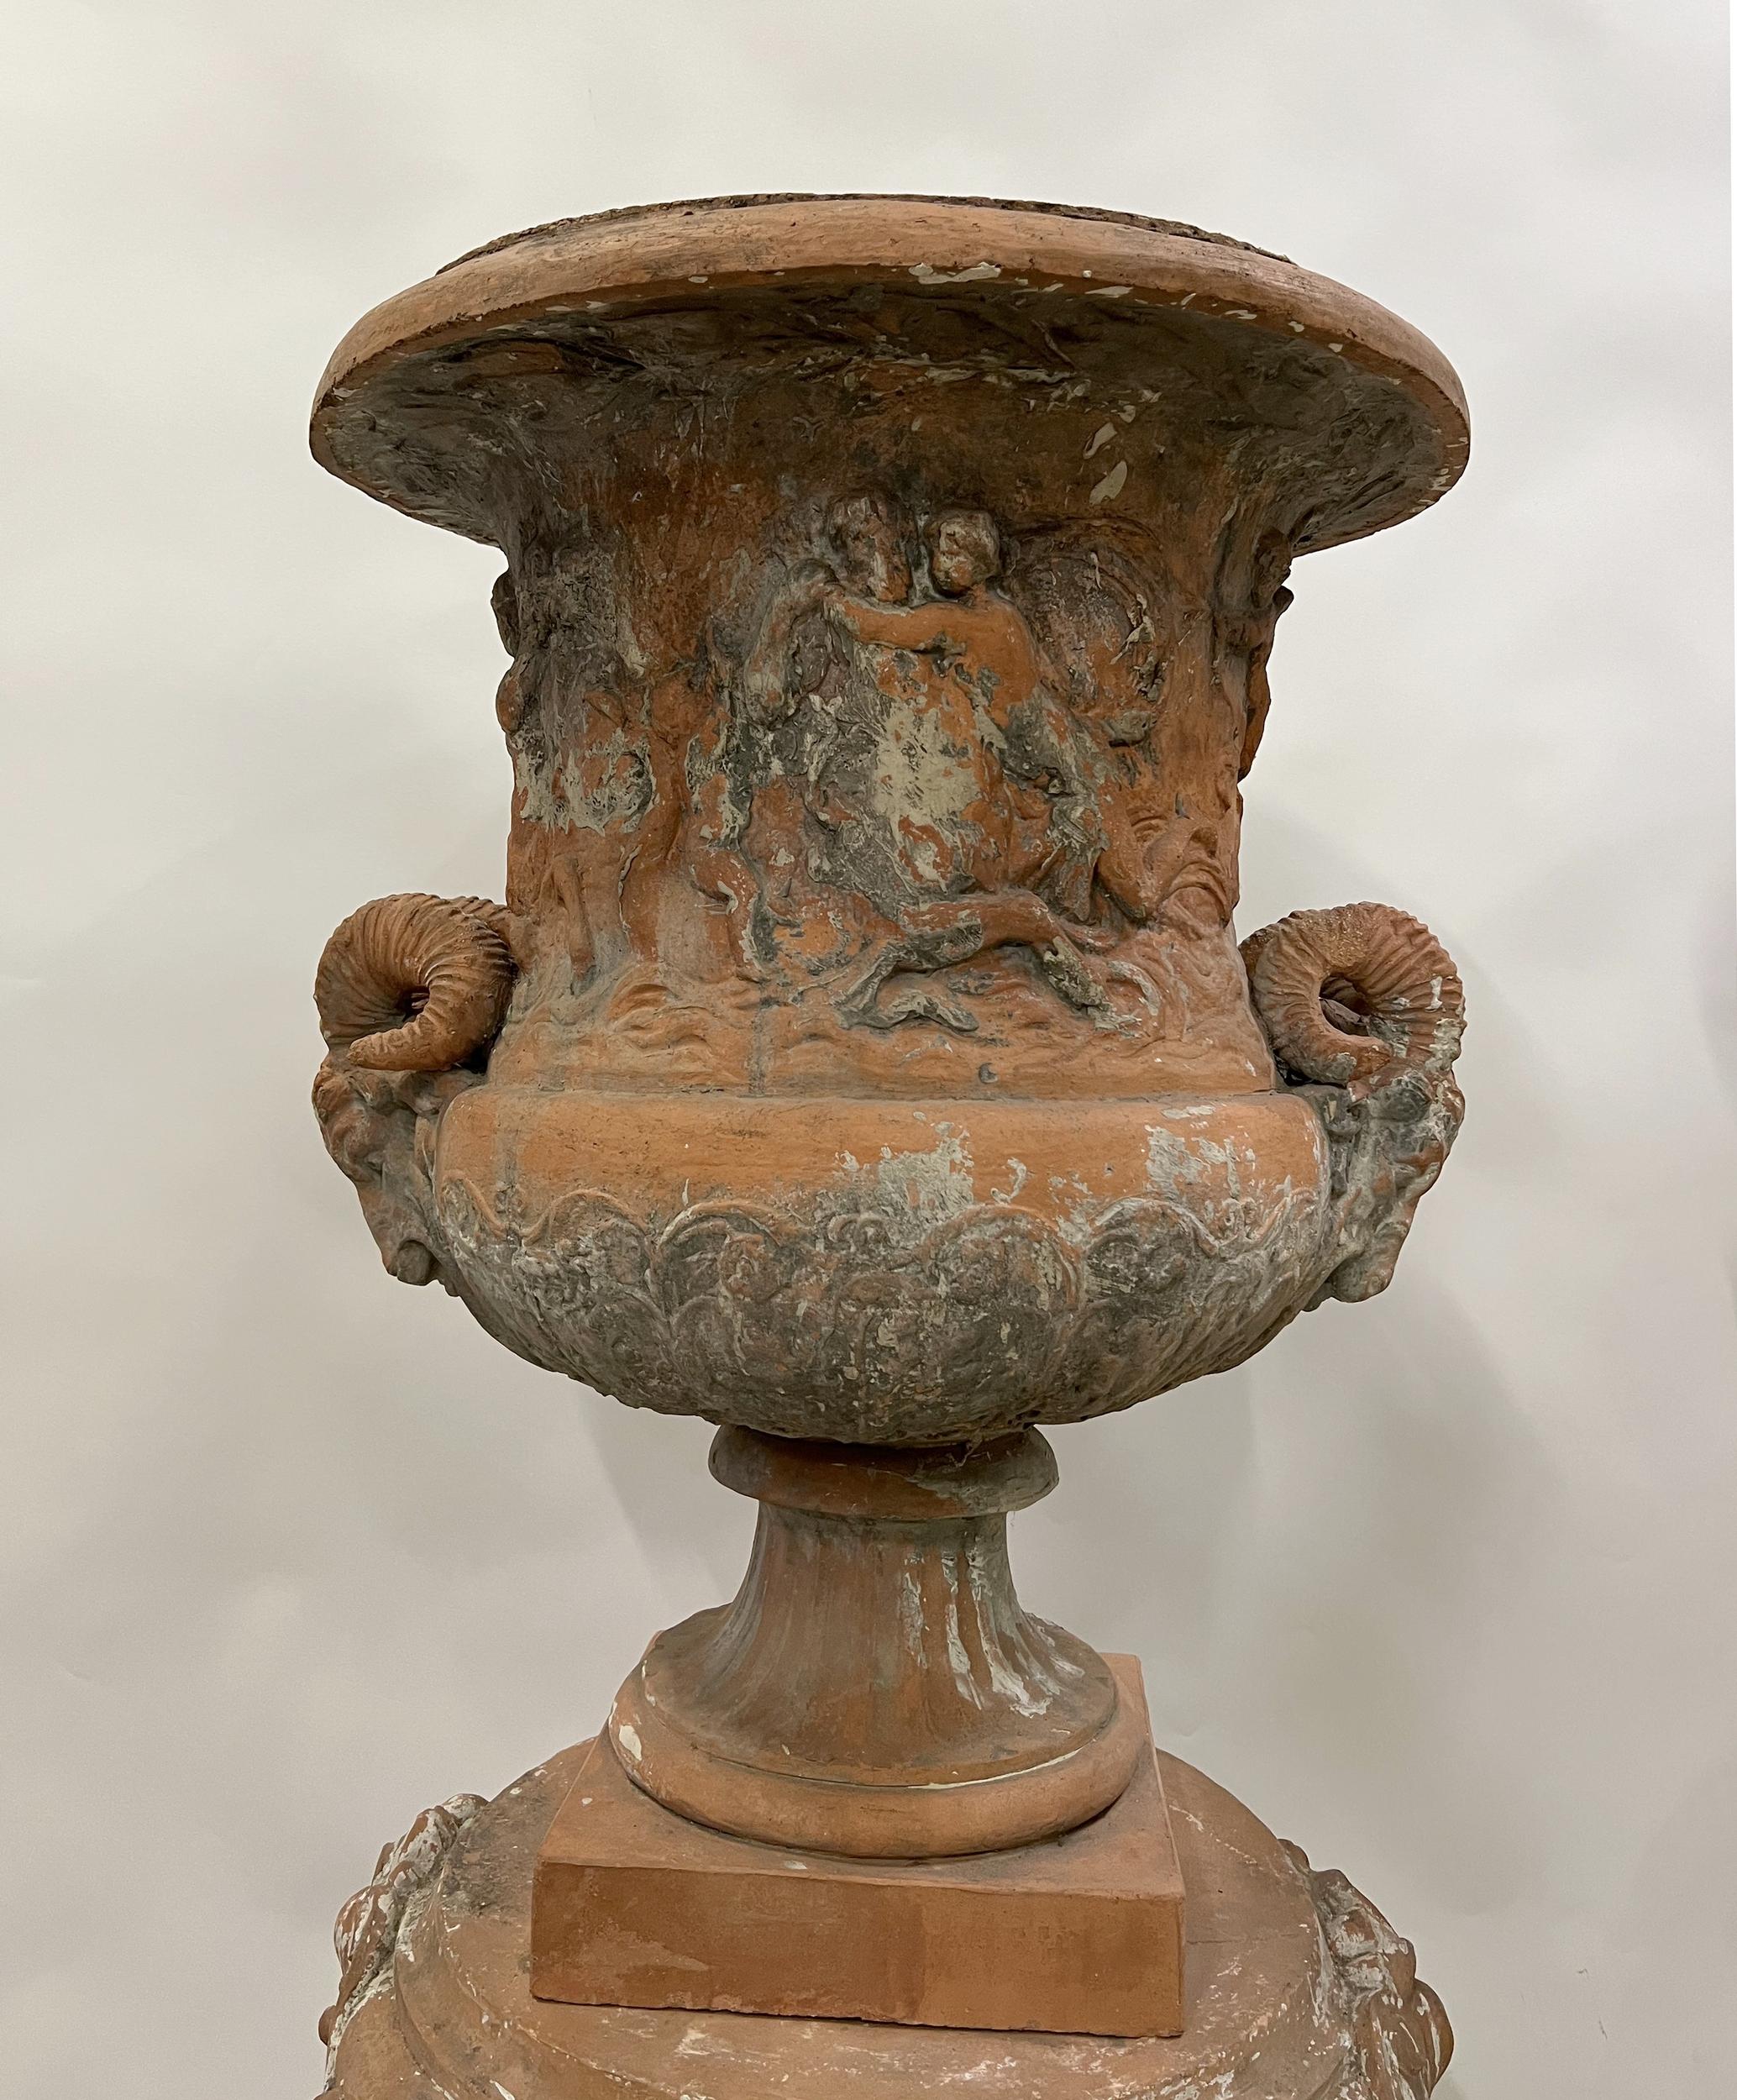 

Monumental pair of Medici vases on columns, in terra cotta.
The vases are decorated with a frieze of mythological figures and ram heads.
The columns are adorned with garlands of flowers and mascarons.

Dimensions of the square base: 67 cm x 67 cm